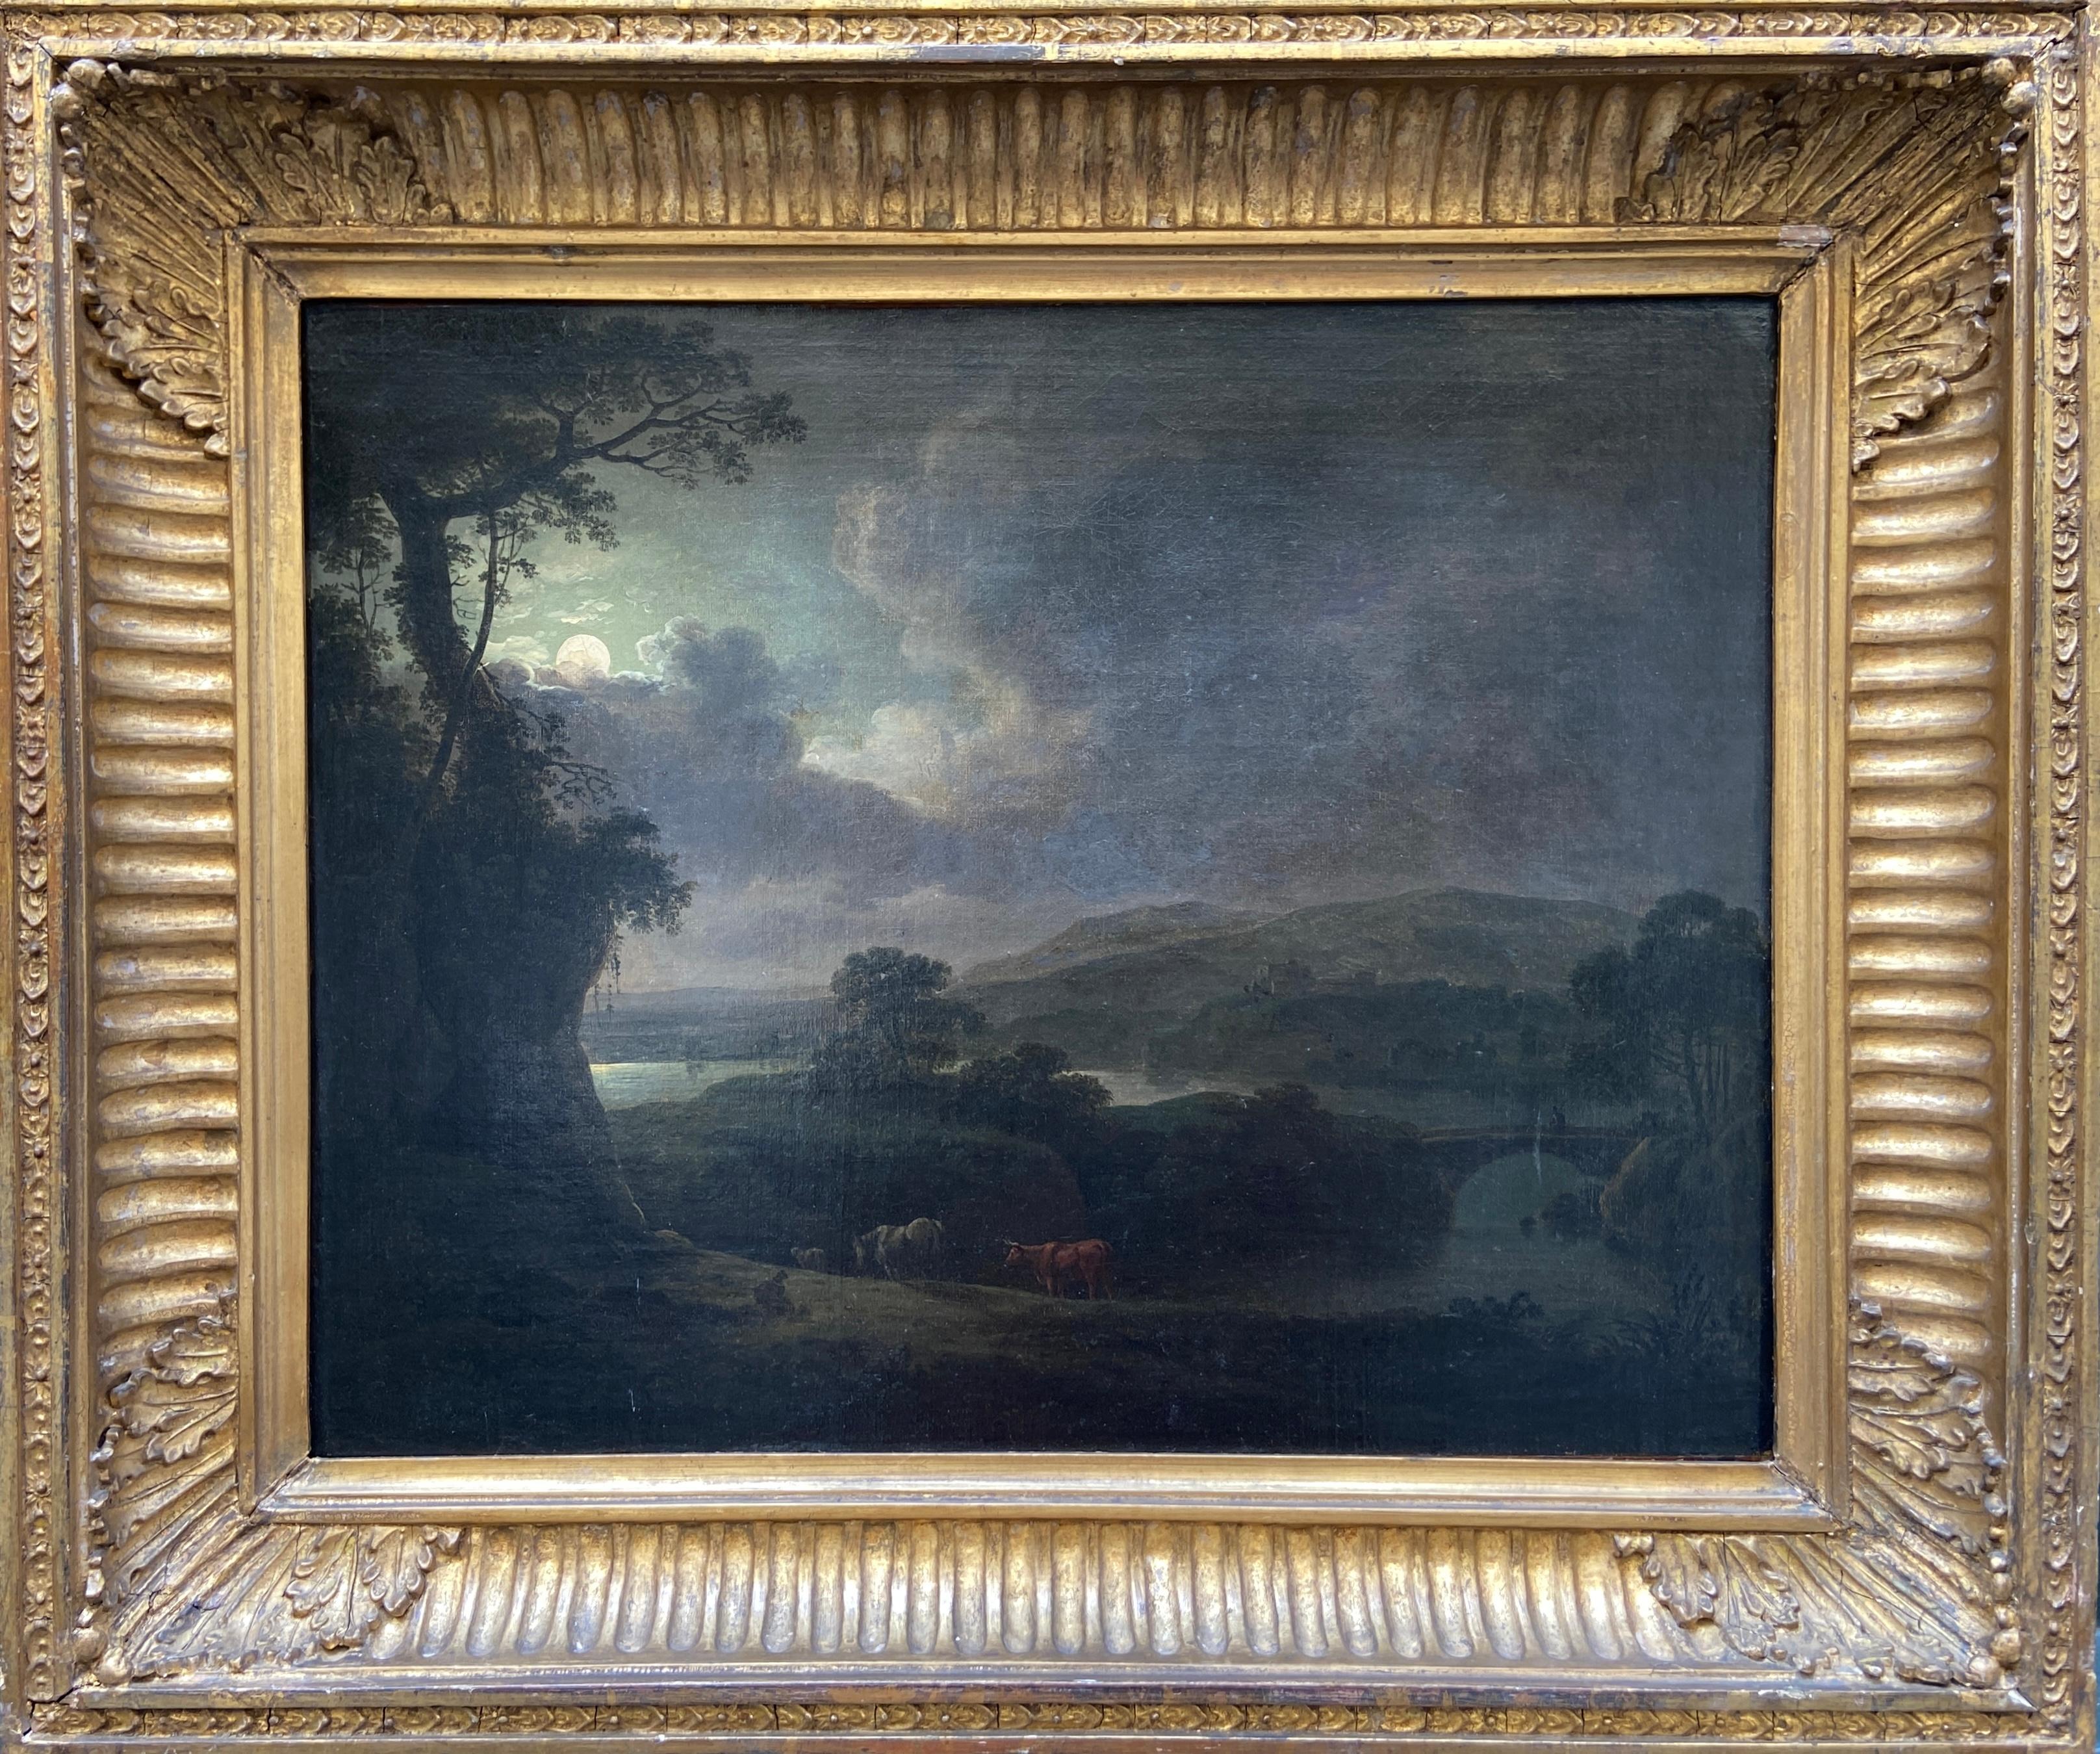 View Across the Valley, Late 18th Century English Moonlit Scene - Painting by John Rathbone